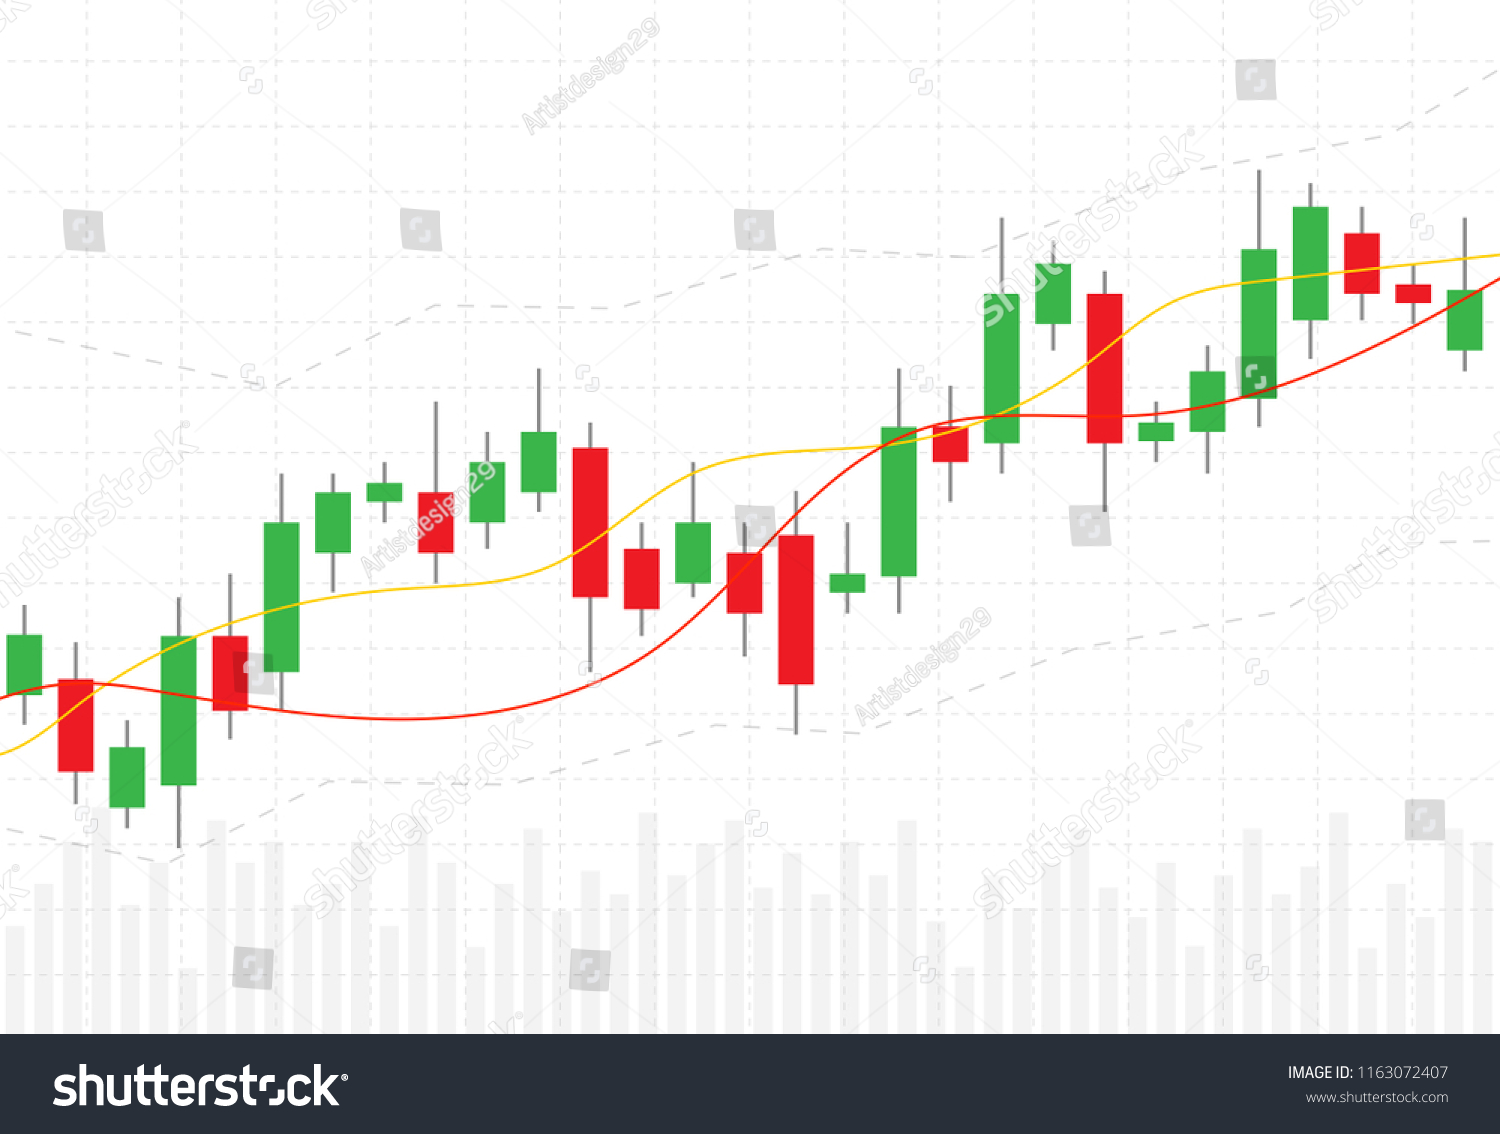 SVG of Business candle stick graph chart of stock market investment trading on background design. Bullish point, Trend of graph. Vector illustration svg